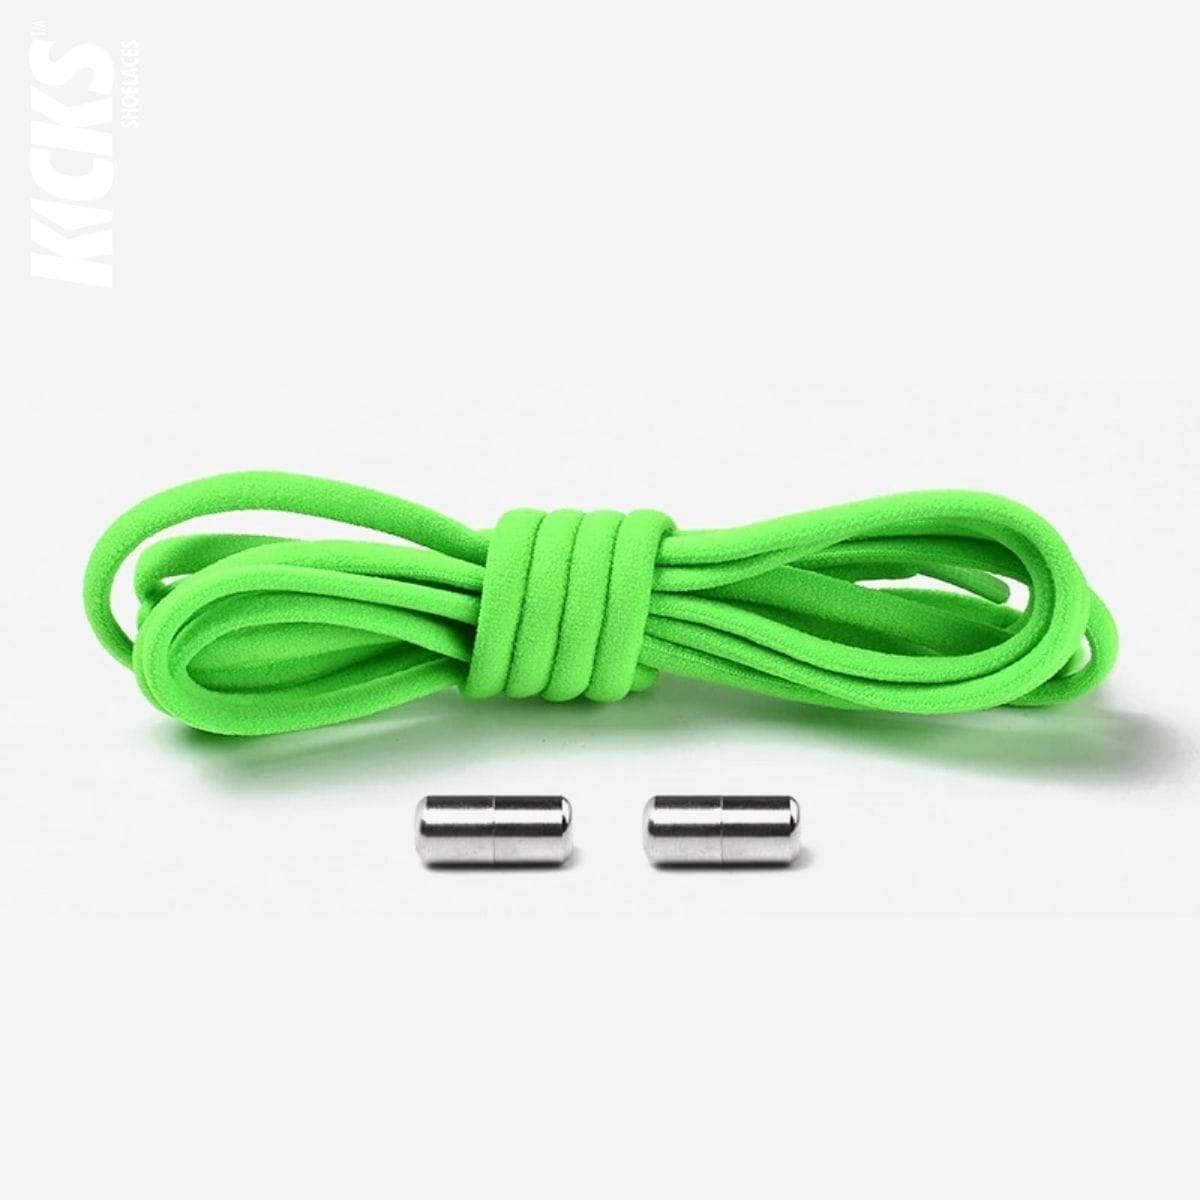 bright-green-kids-elastic-no-tie-shoe-laces-for-sneakers-by-kicks-shoelaces